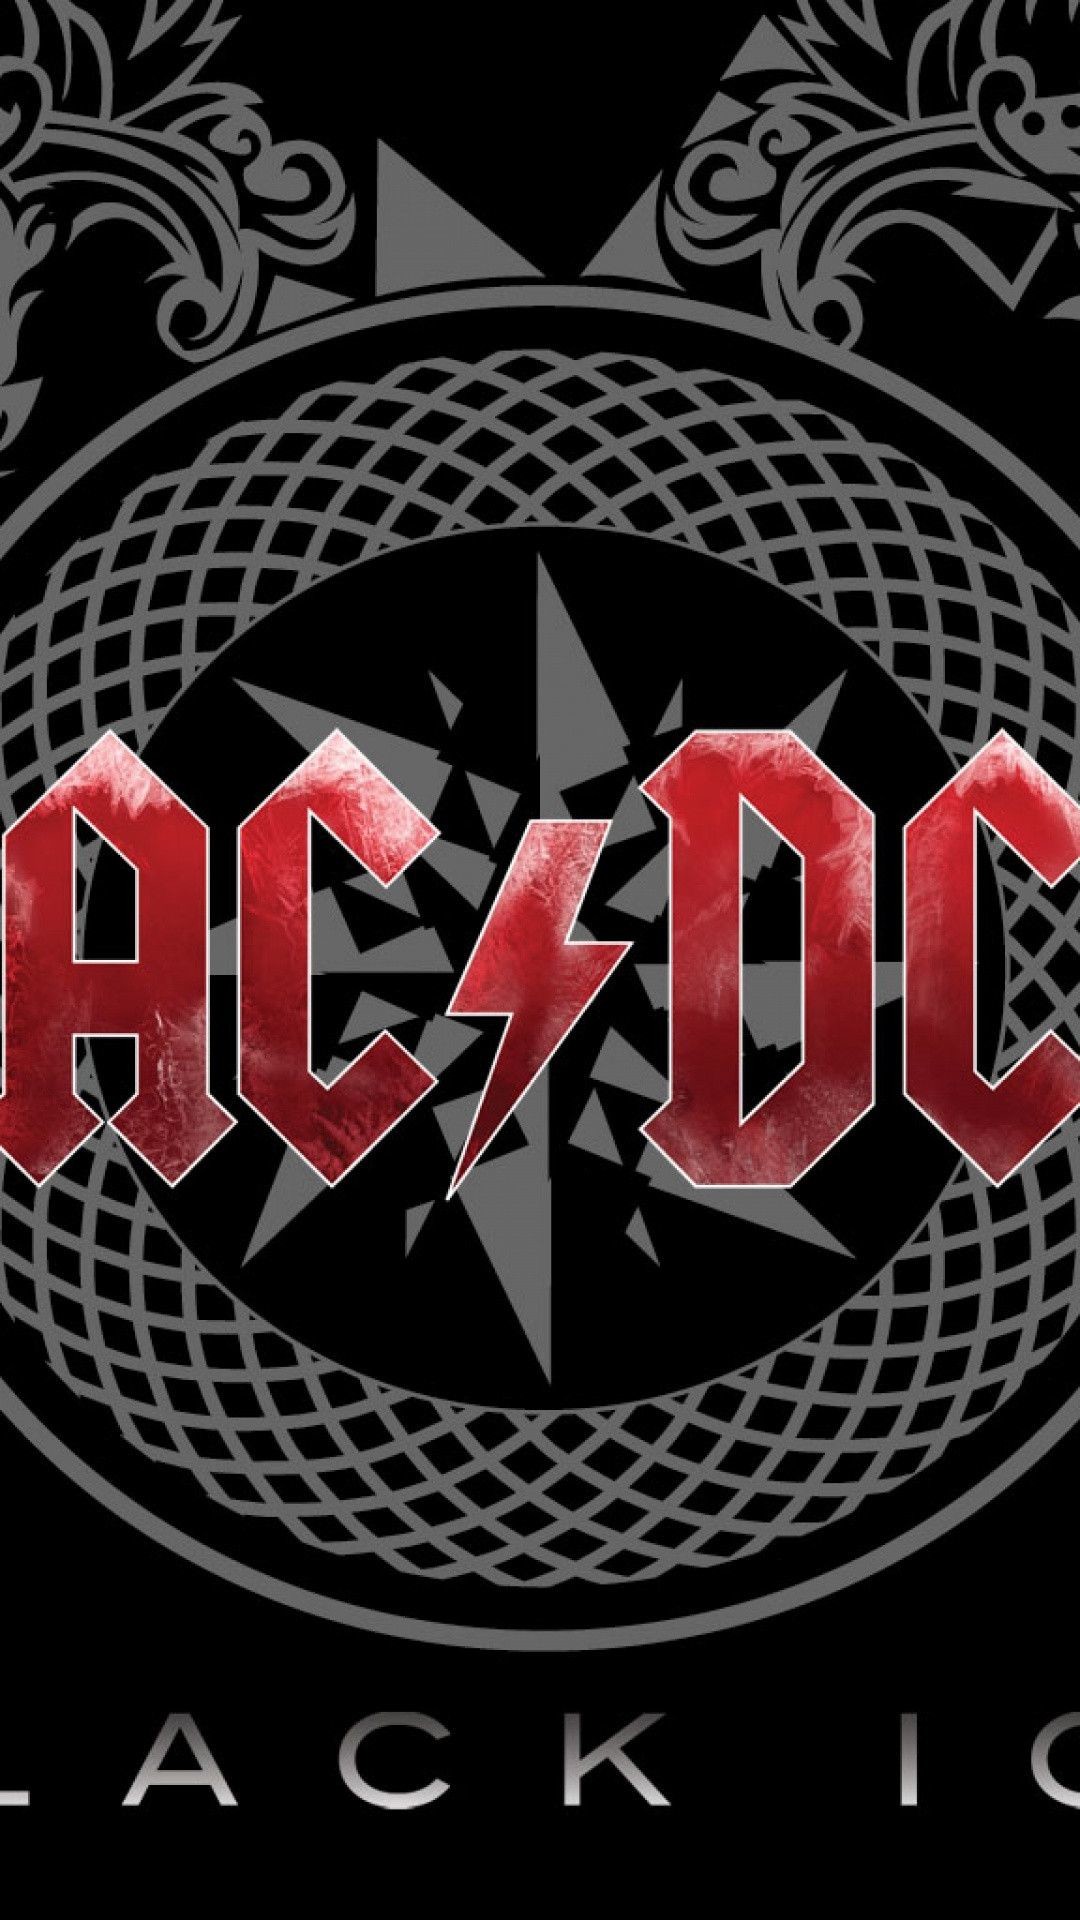 General Acdc Ac/dc Rock - Ad Dc Black Ice , HD Wallpaper & Backgrounds